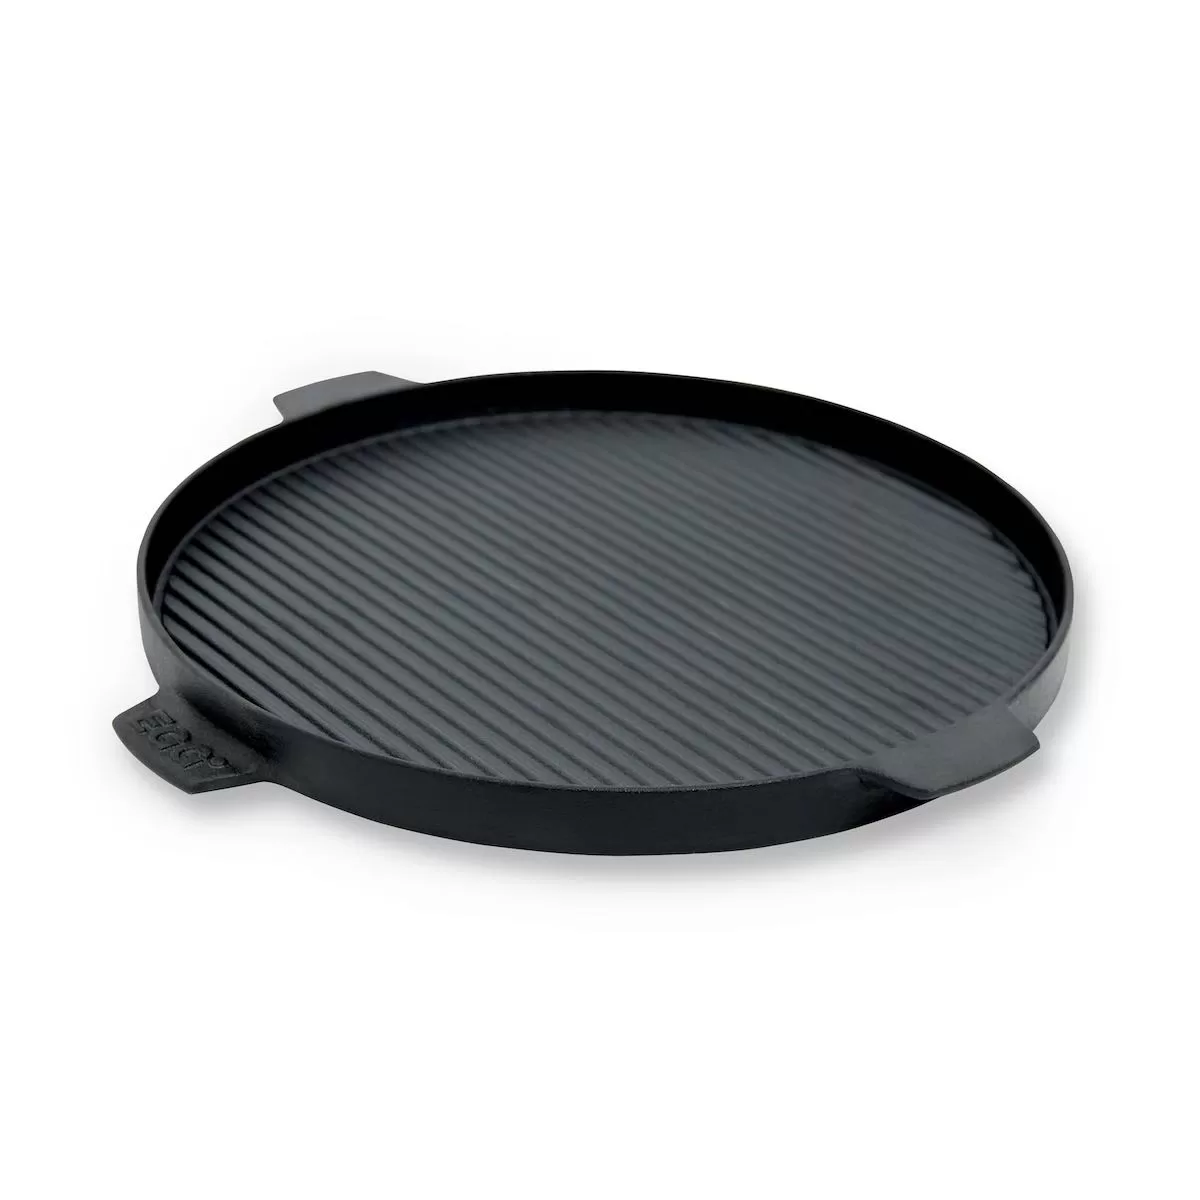 Dual-Sided Cast-Iron Plancha Griddle